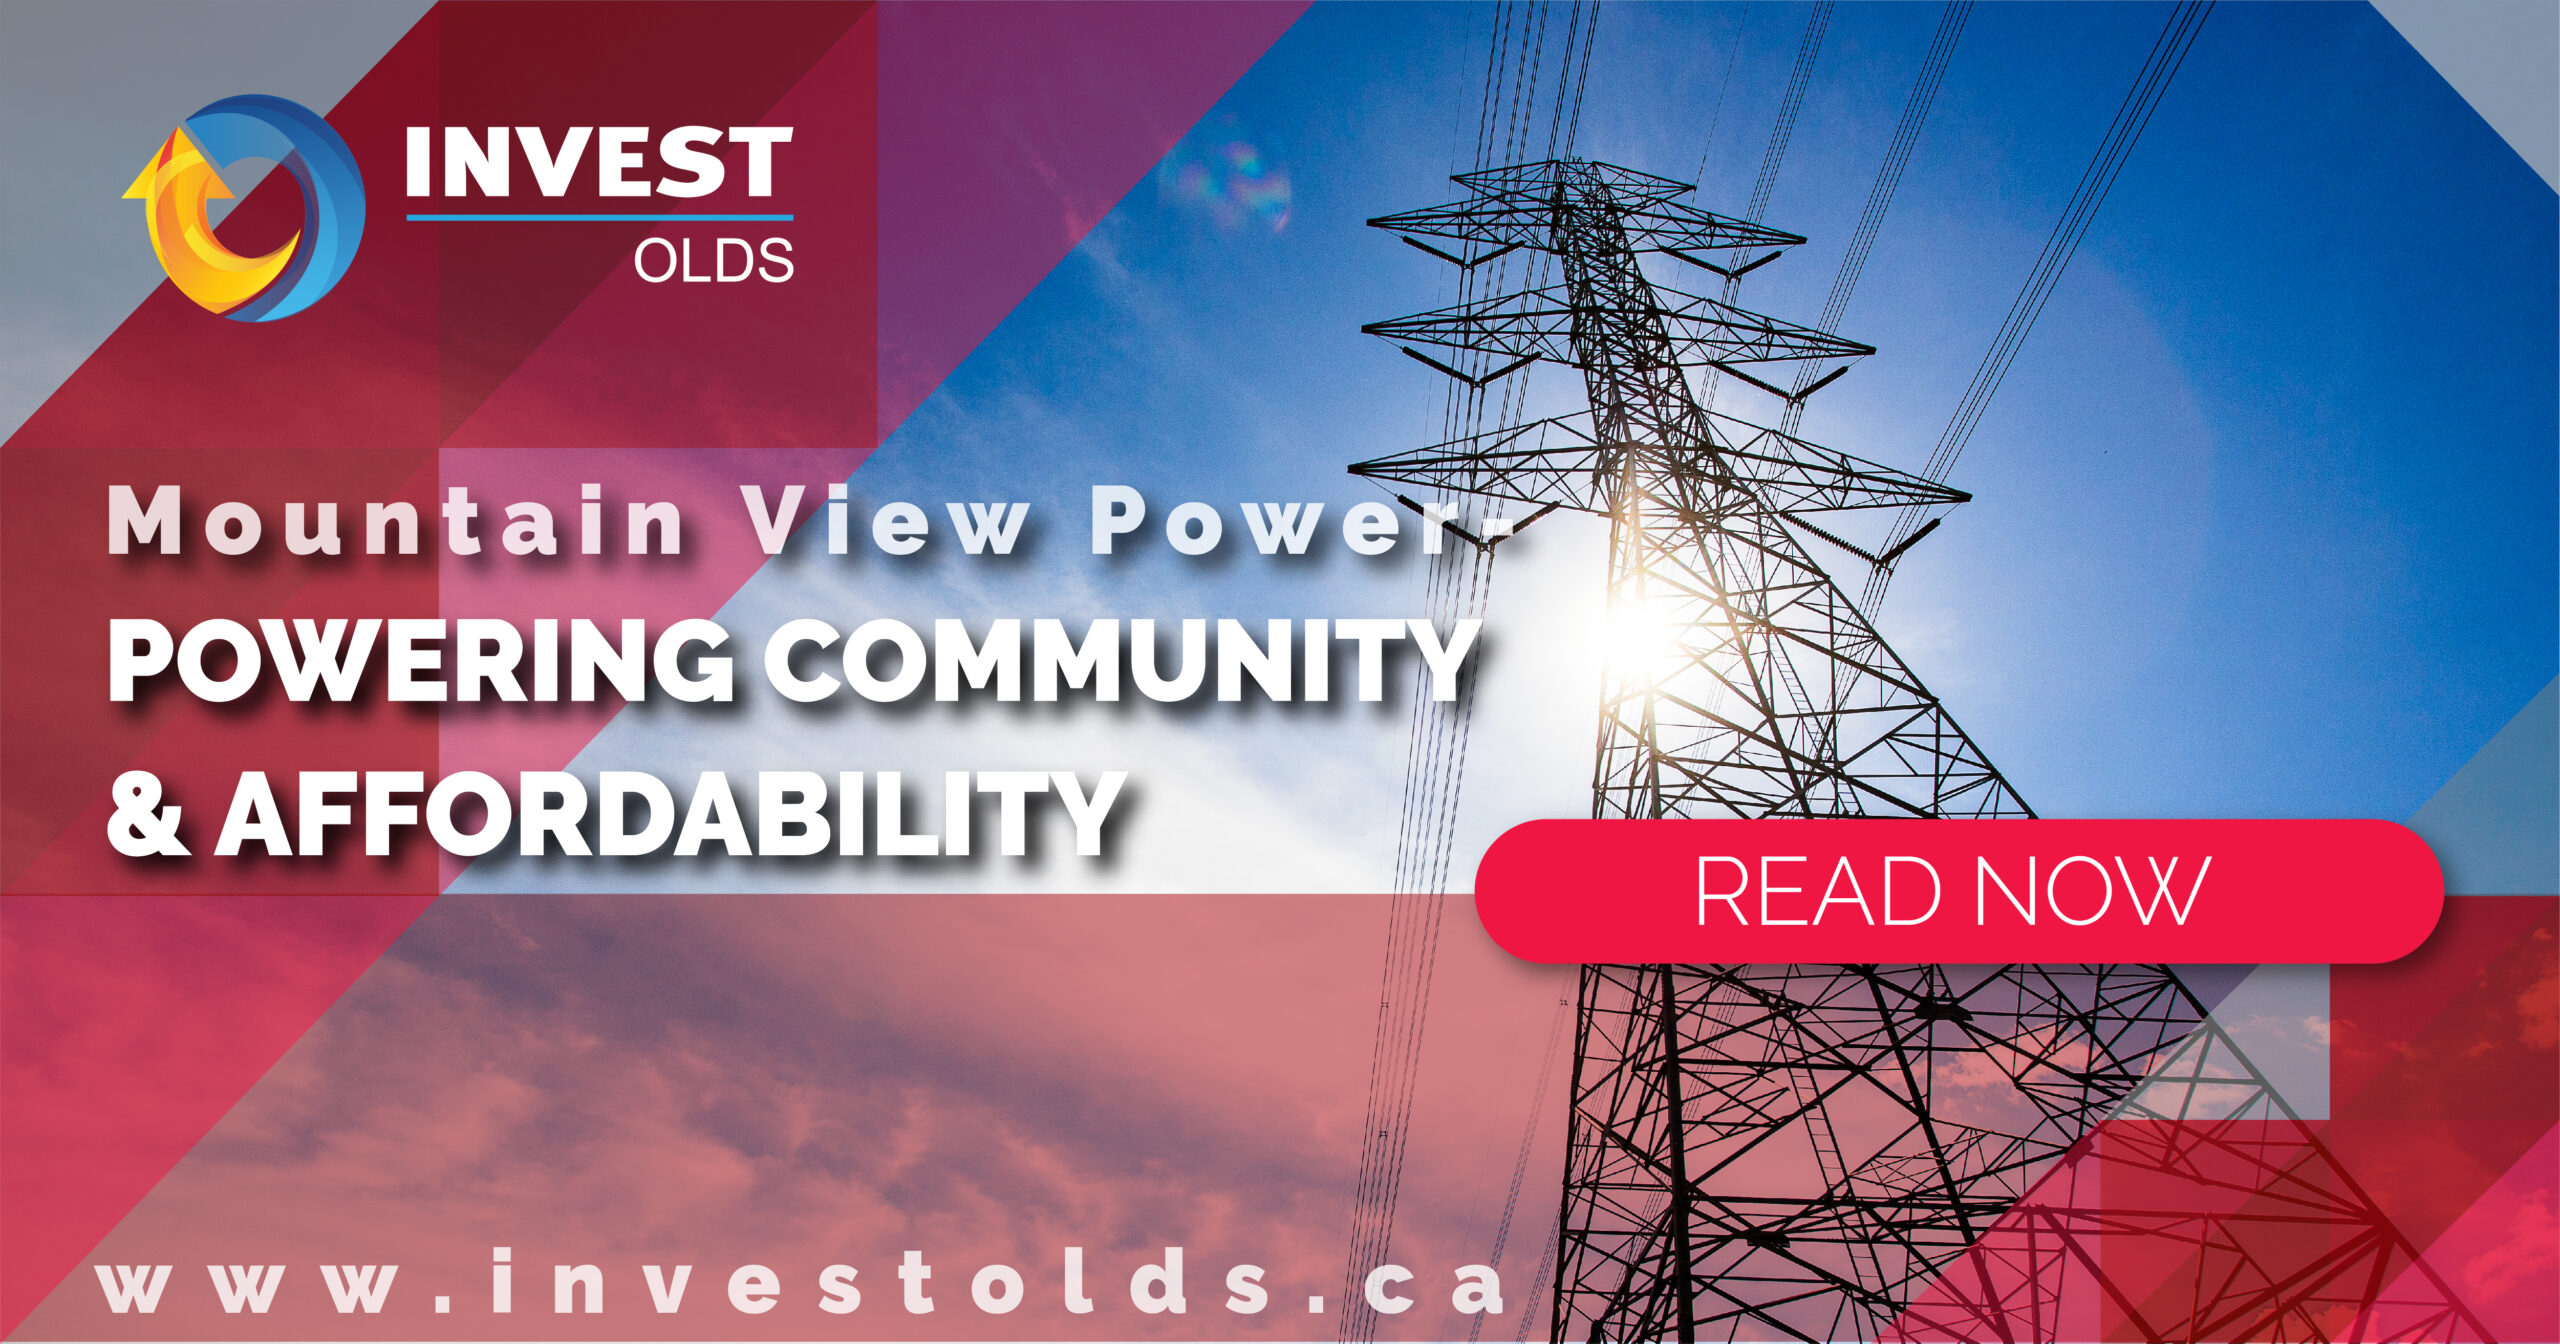 The Real MVP – Powering Community and Affordability 